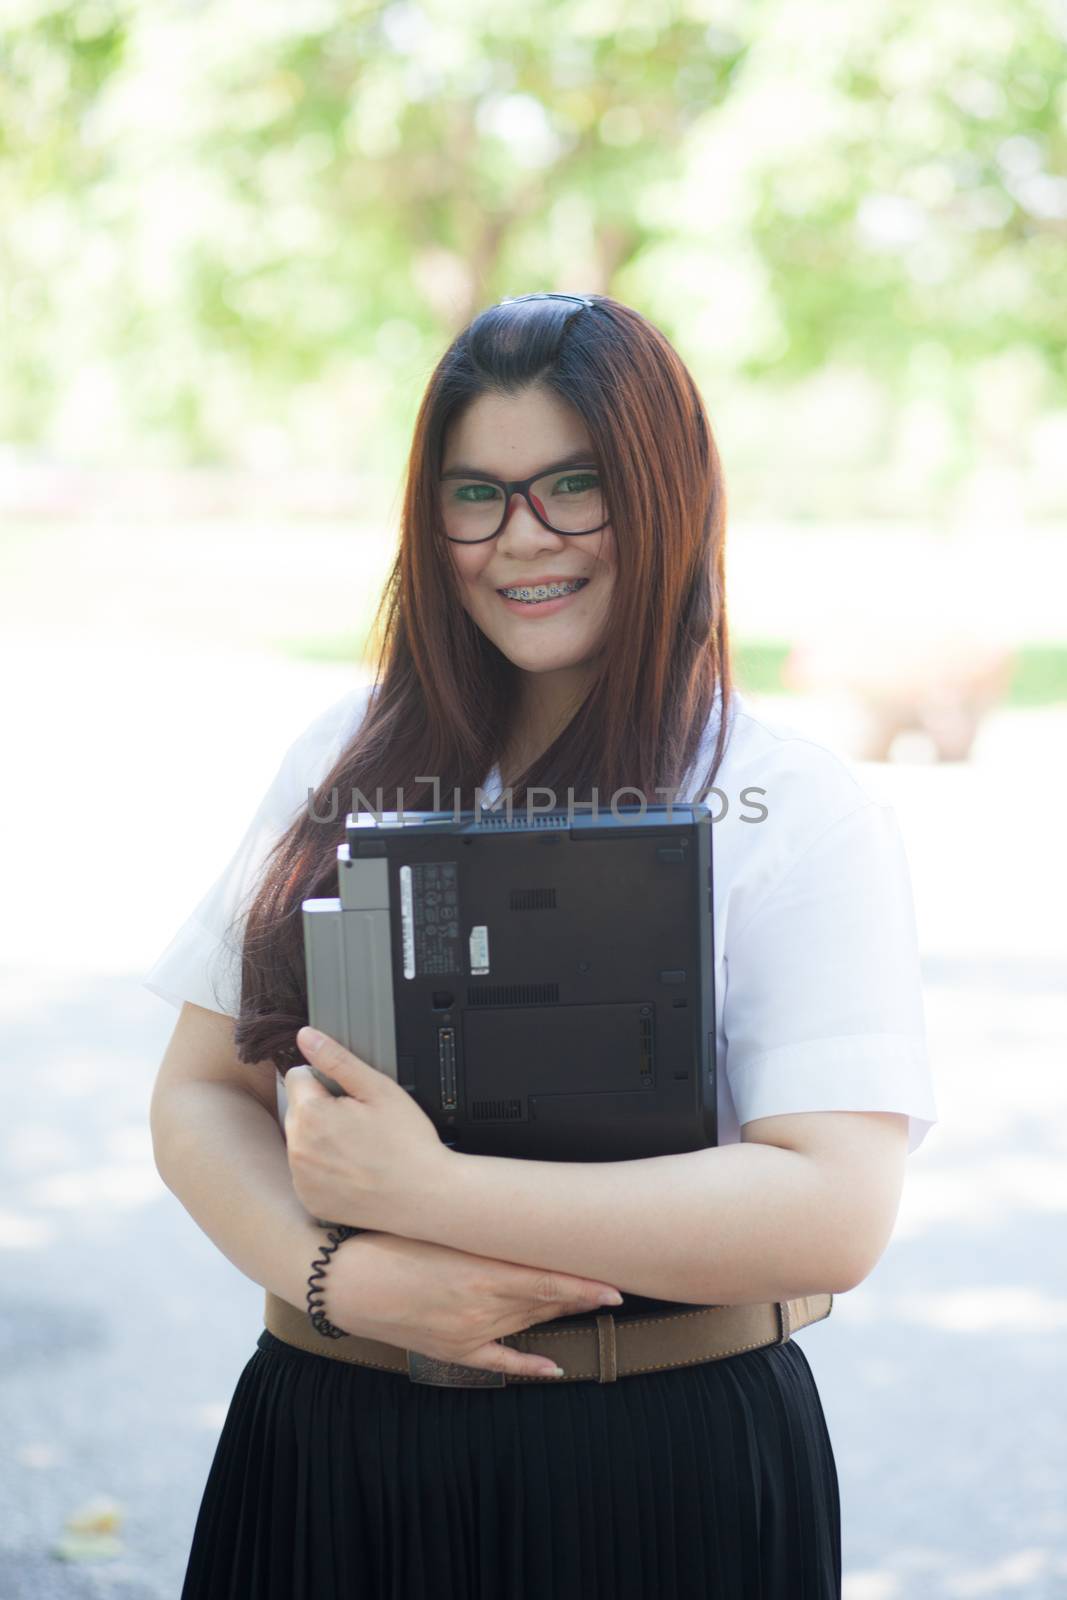 Female student holding notebook computer. Woman wearing glasses and smiling